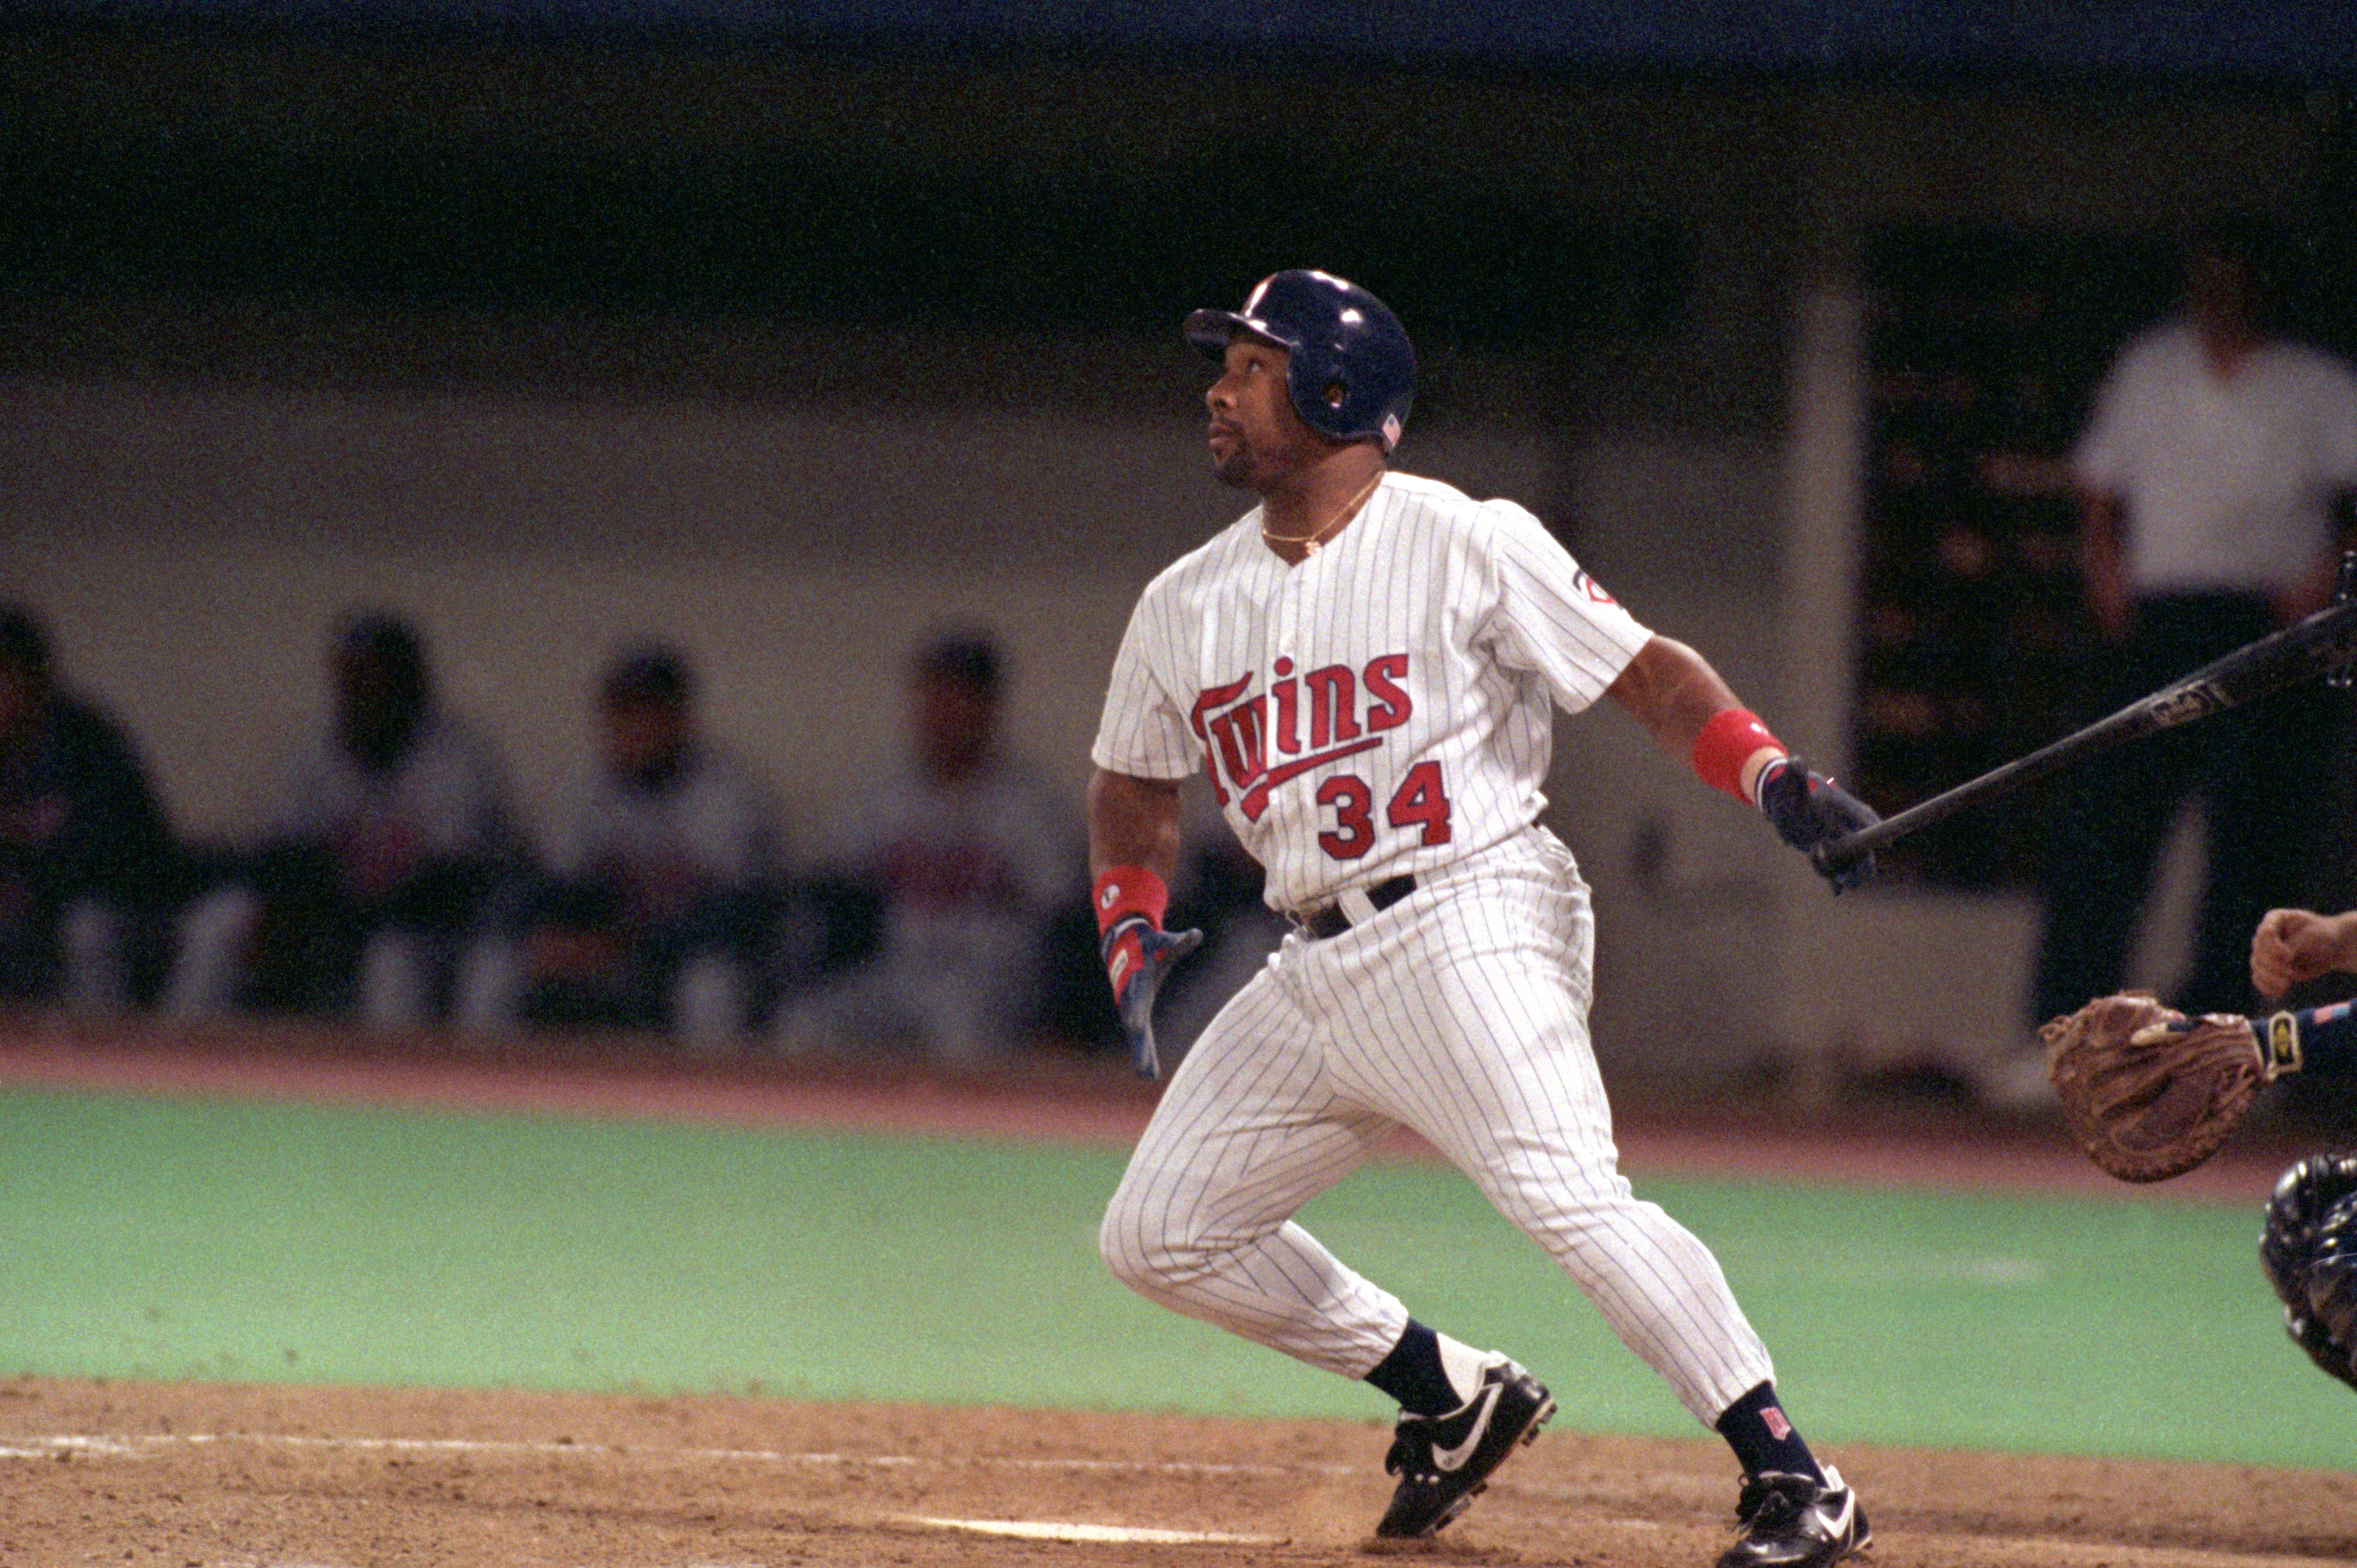 MINNEAPOLIS - OCTOBER 19:  Kirby Puckett #34 of the Minnesota Twins swings at a pitch during Game one of the 1991 World Series against the Atlanta Braves at the Metrodome on October 19, 1991 in Minneapolis, Minnesota. The Twins defeated the Braves 5-2.  (